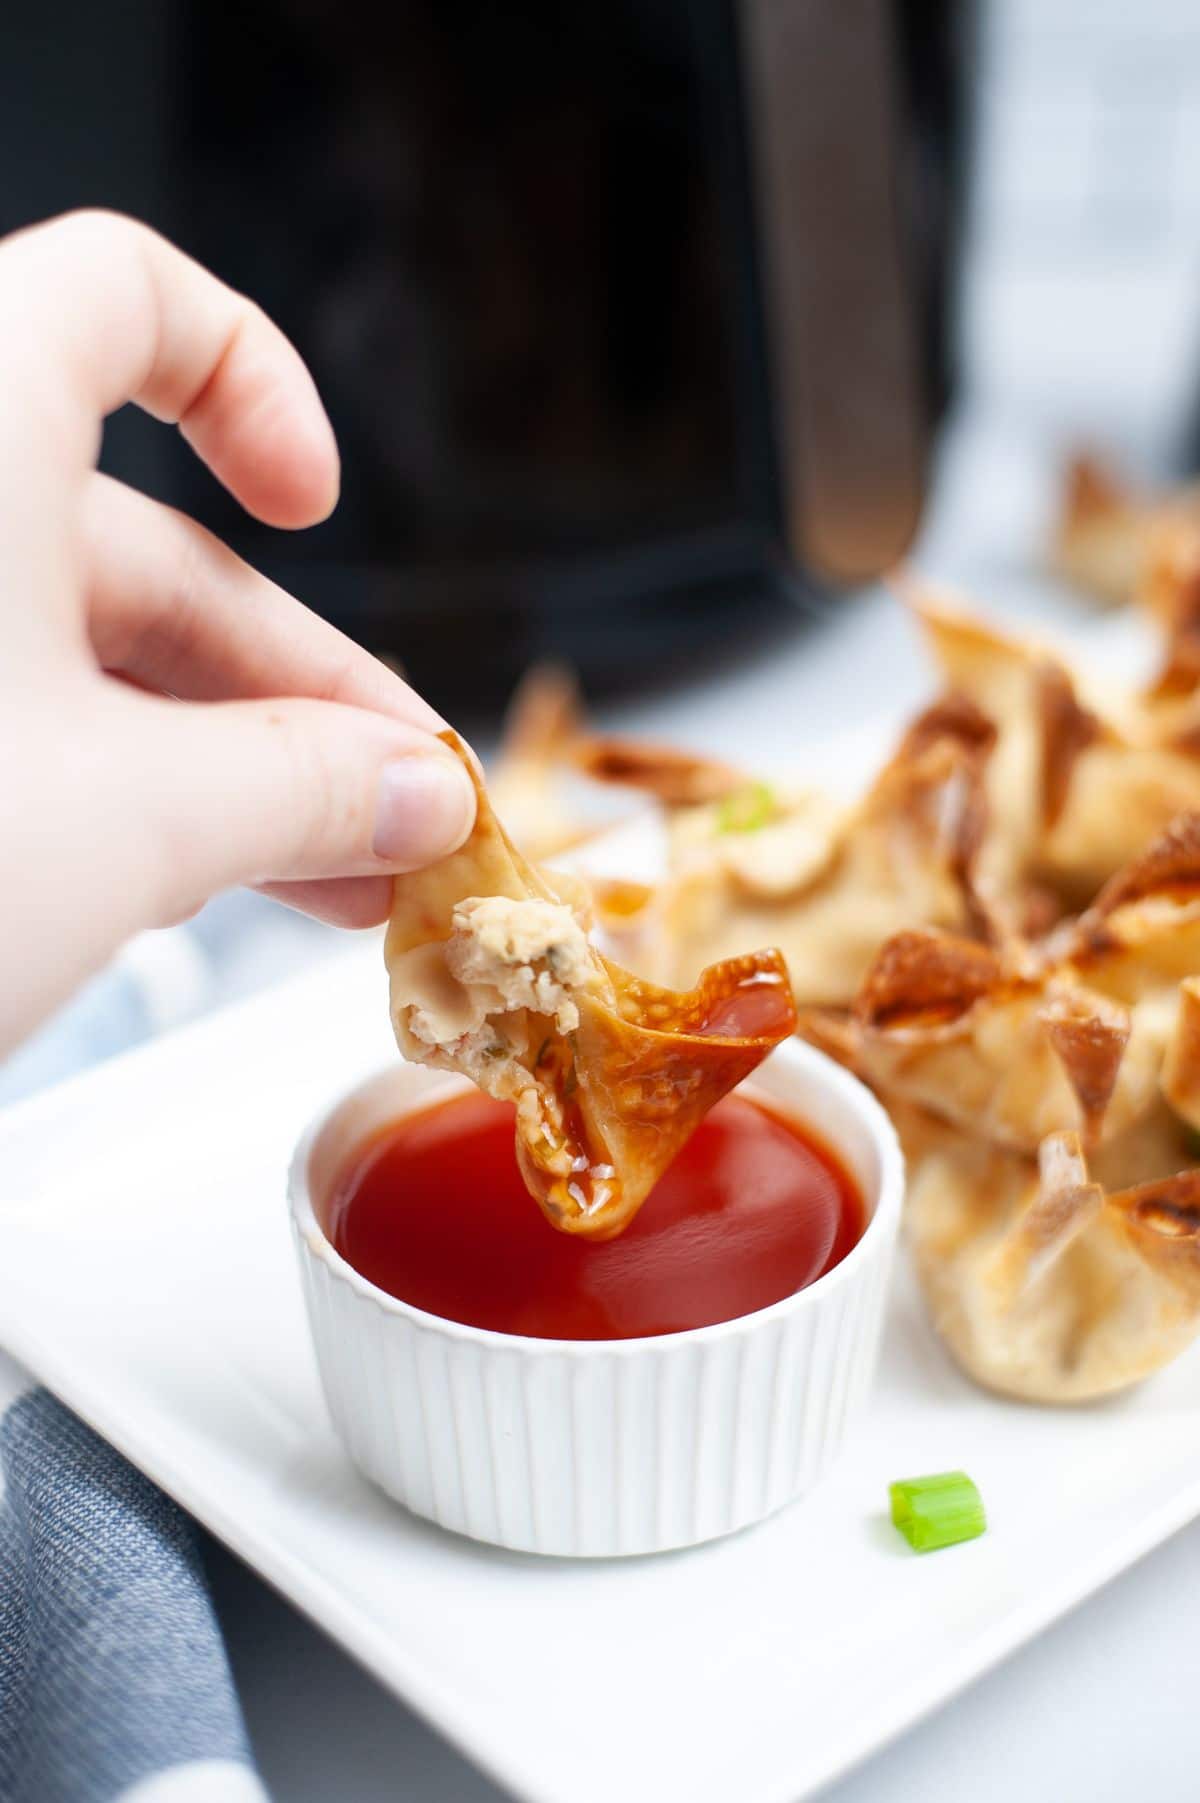 hand dipping the wonton into the dip 